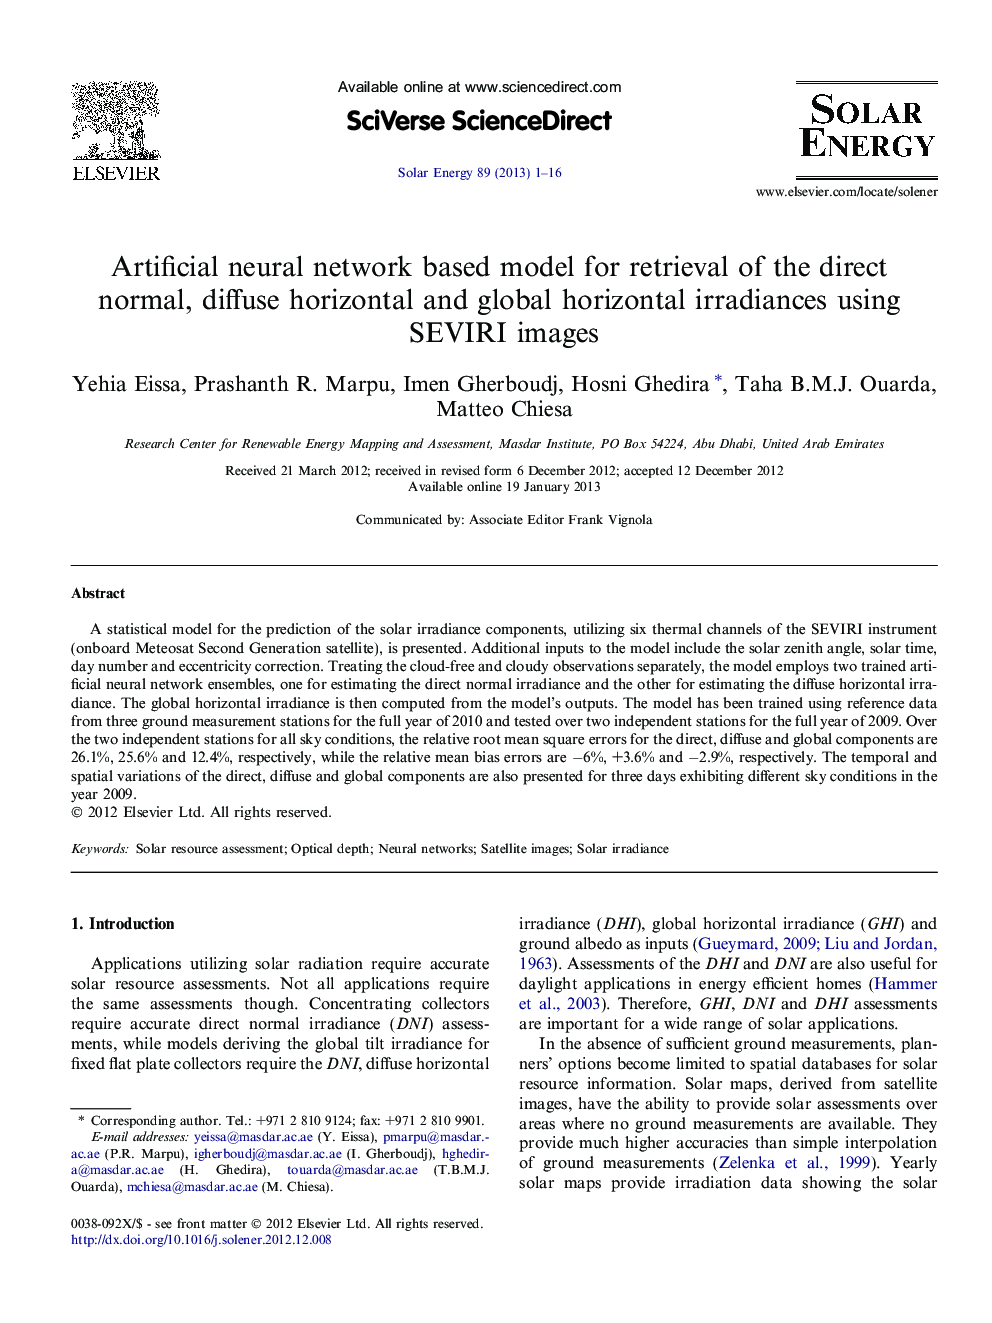 Artificial neural network based model for retrieval of the direct normal, diffuse horizontal and global horizontal irradiances using SEVIRI images